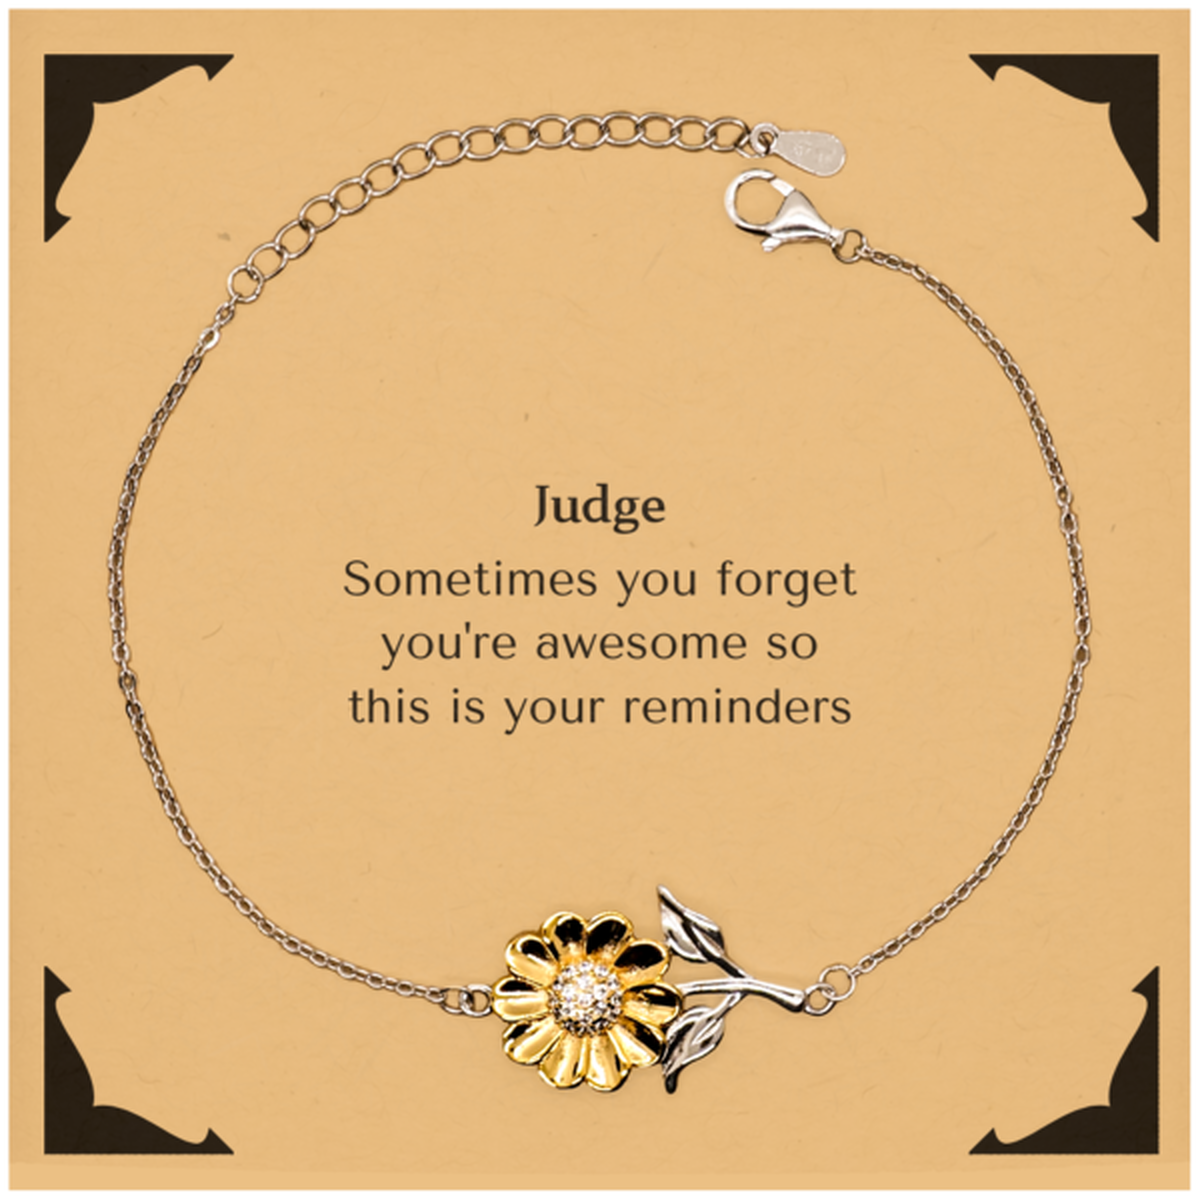 Sentimental Judge Sunflower Bracelet, Judge Sometimes you forget you're awesome so this is your reminders, Graduation Christmas Birthday Gifts for Judge, Men, Women, Coworkers